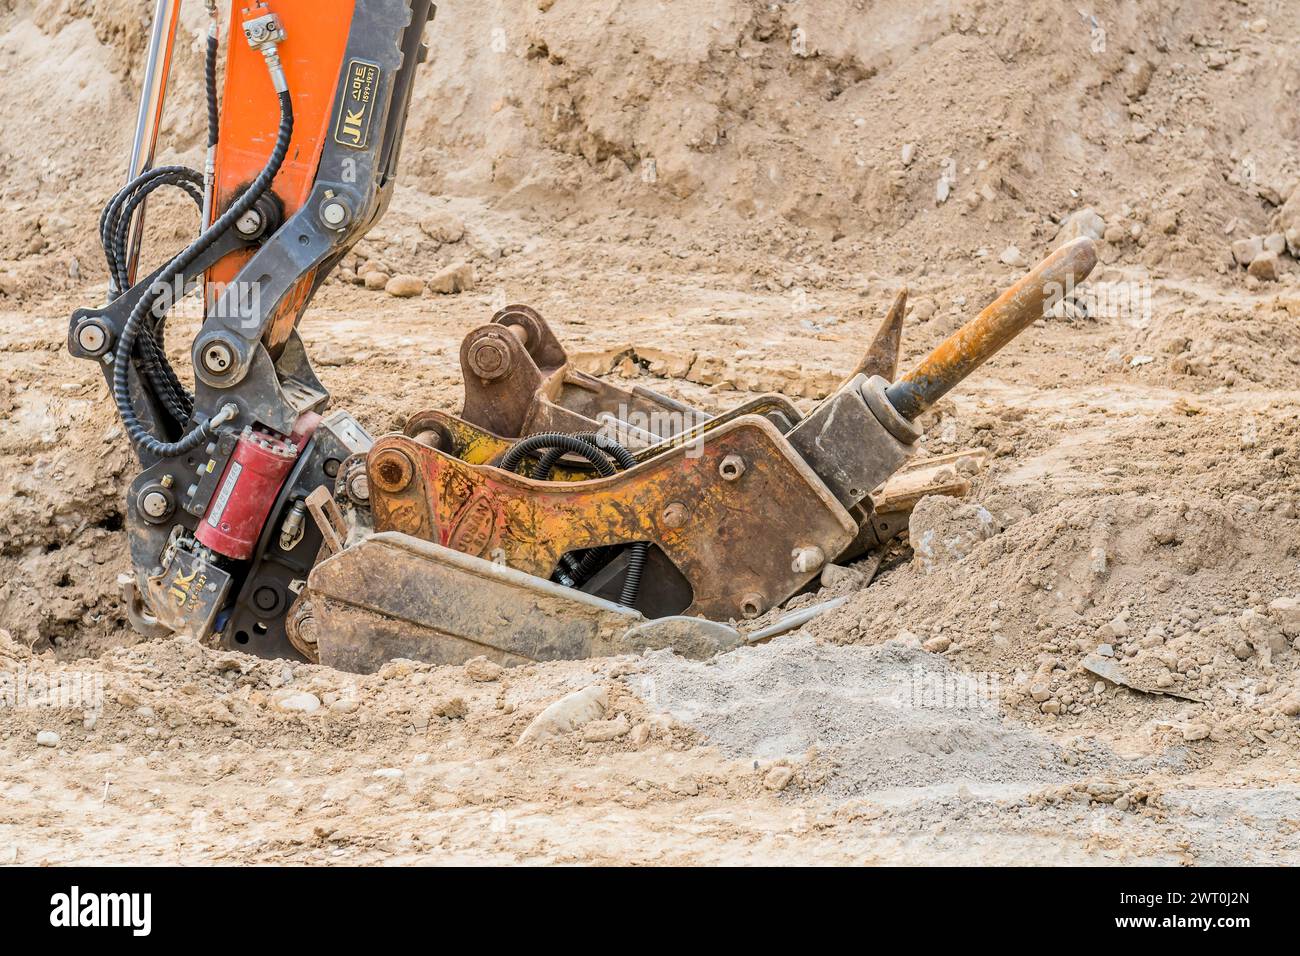 Jackhammer backhoe attachment sitting on dirt ground at construction site in Daejeon South Korea Stock Photo